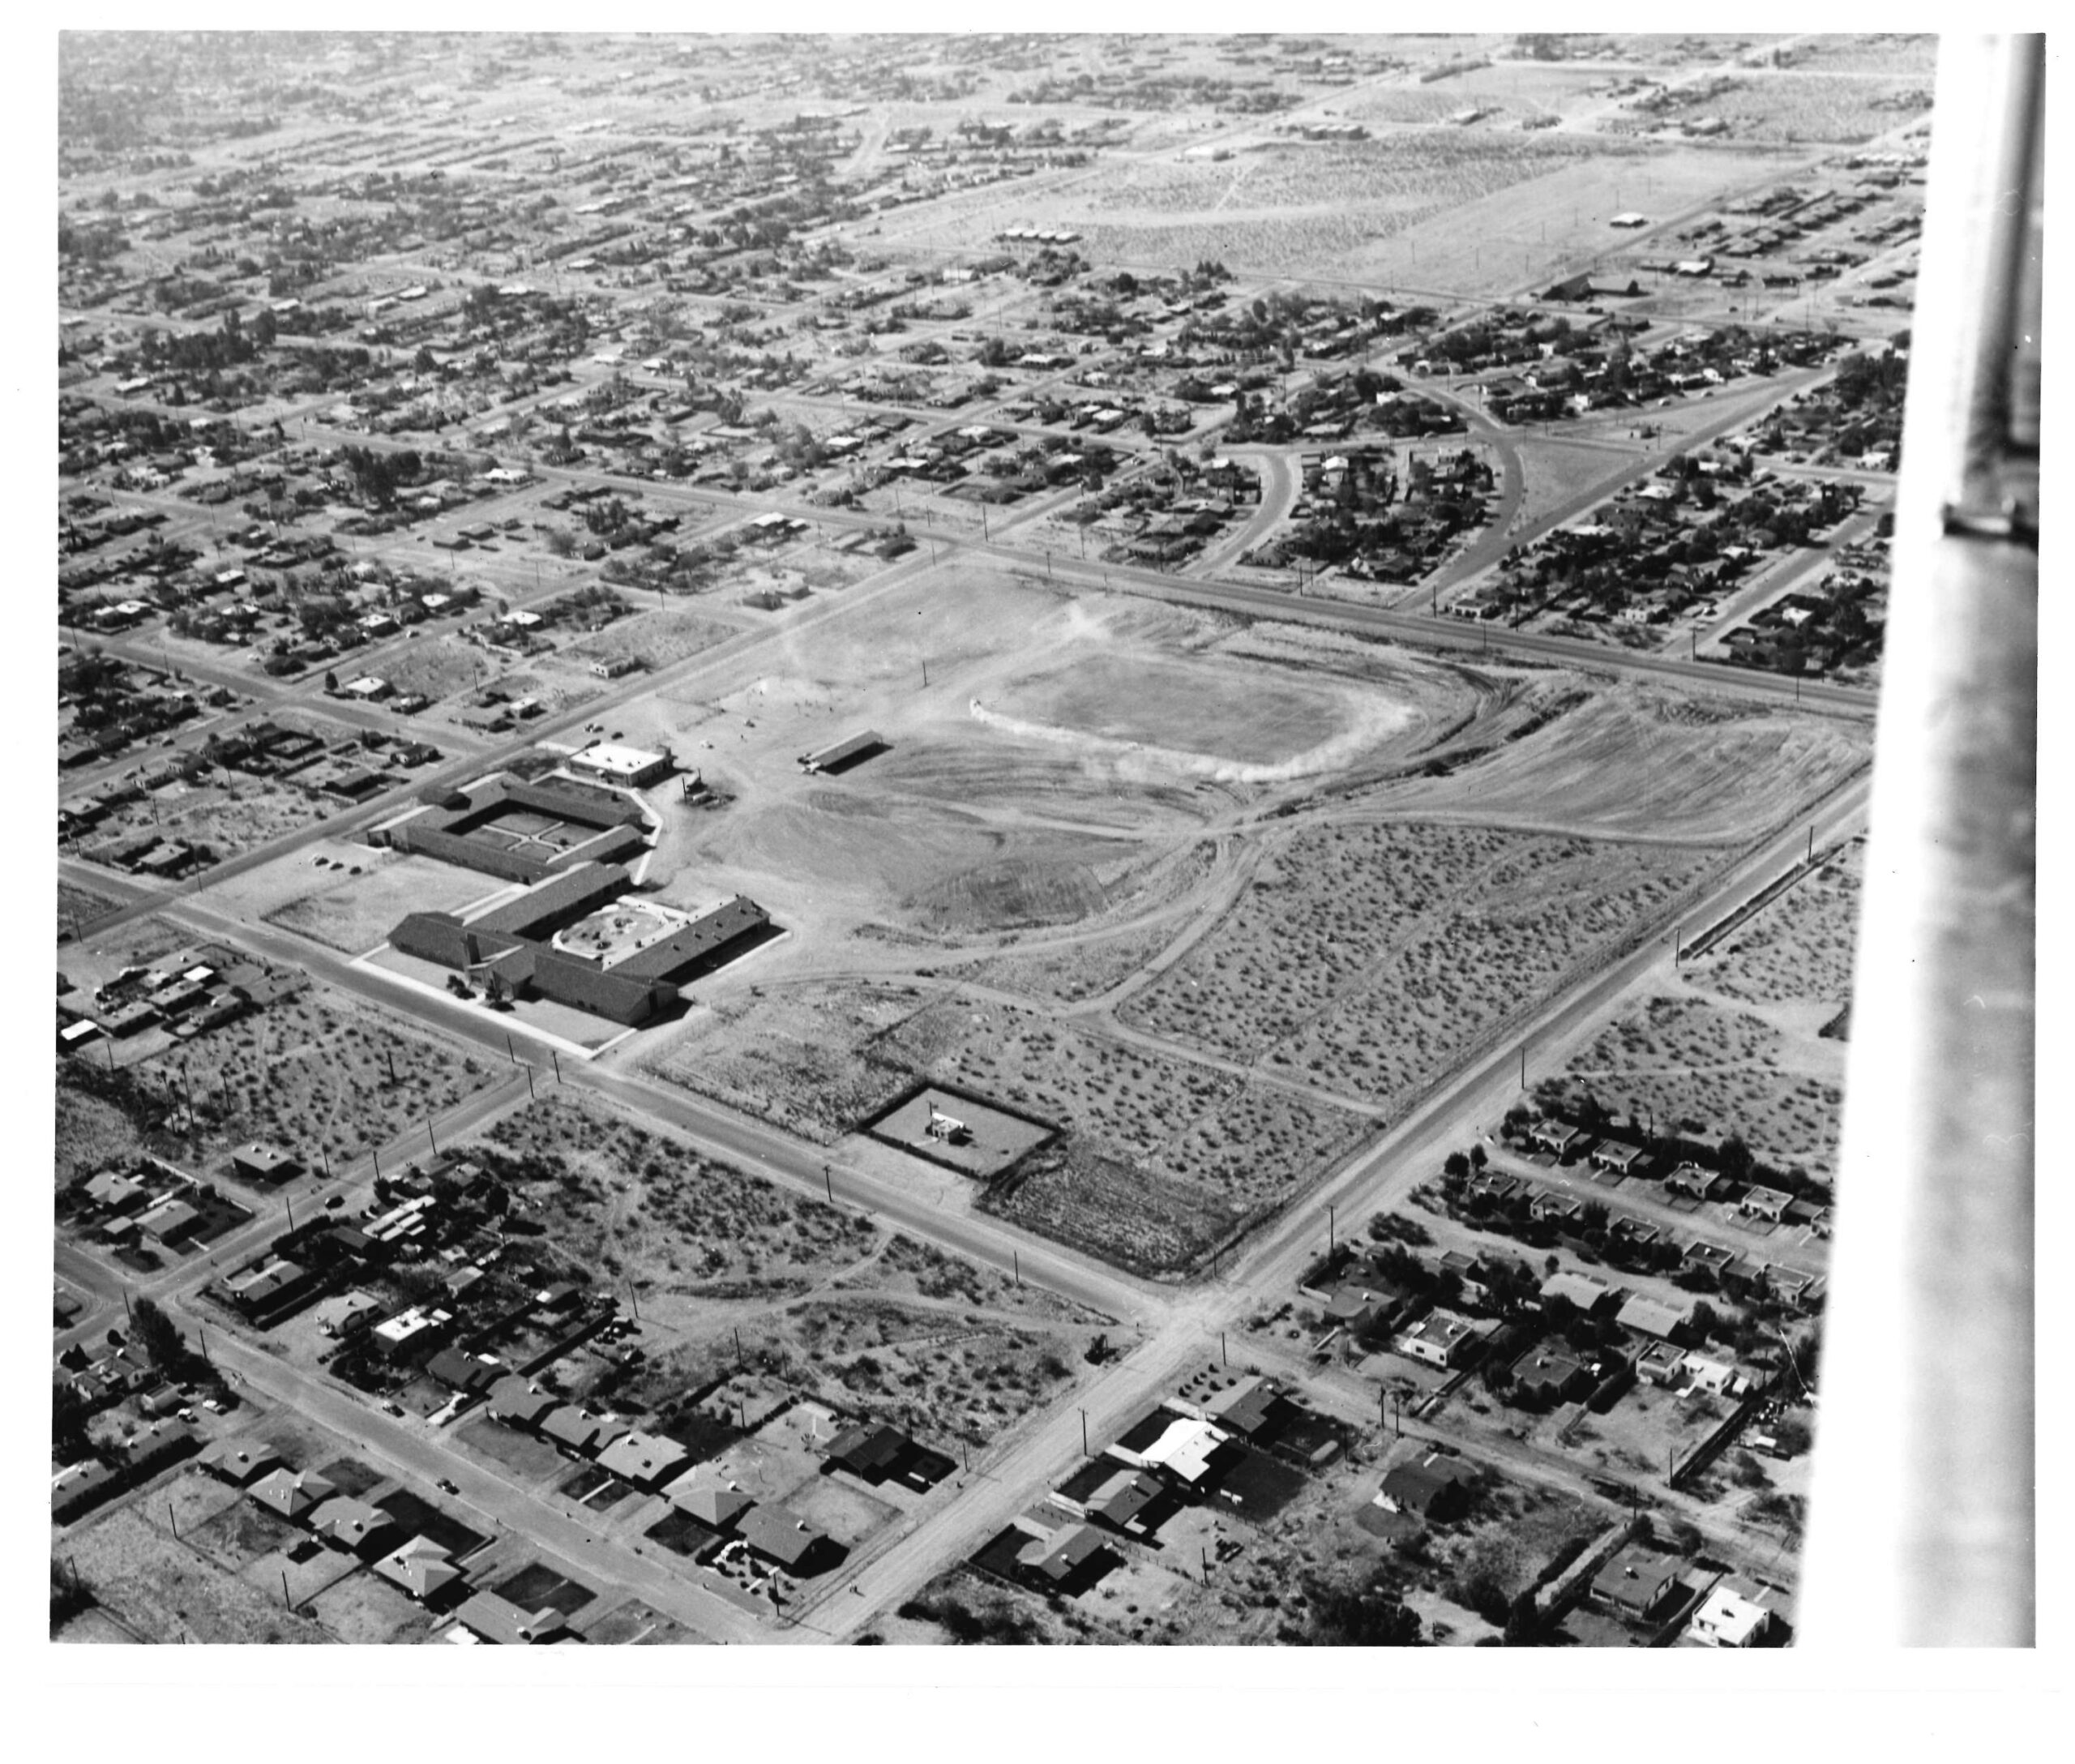 Aerial view of the campus in the 1950s